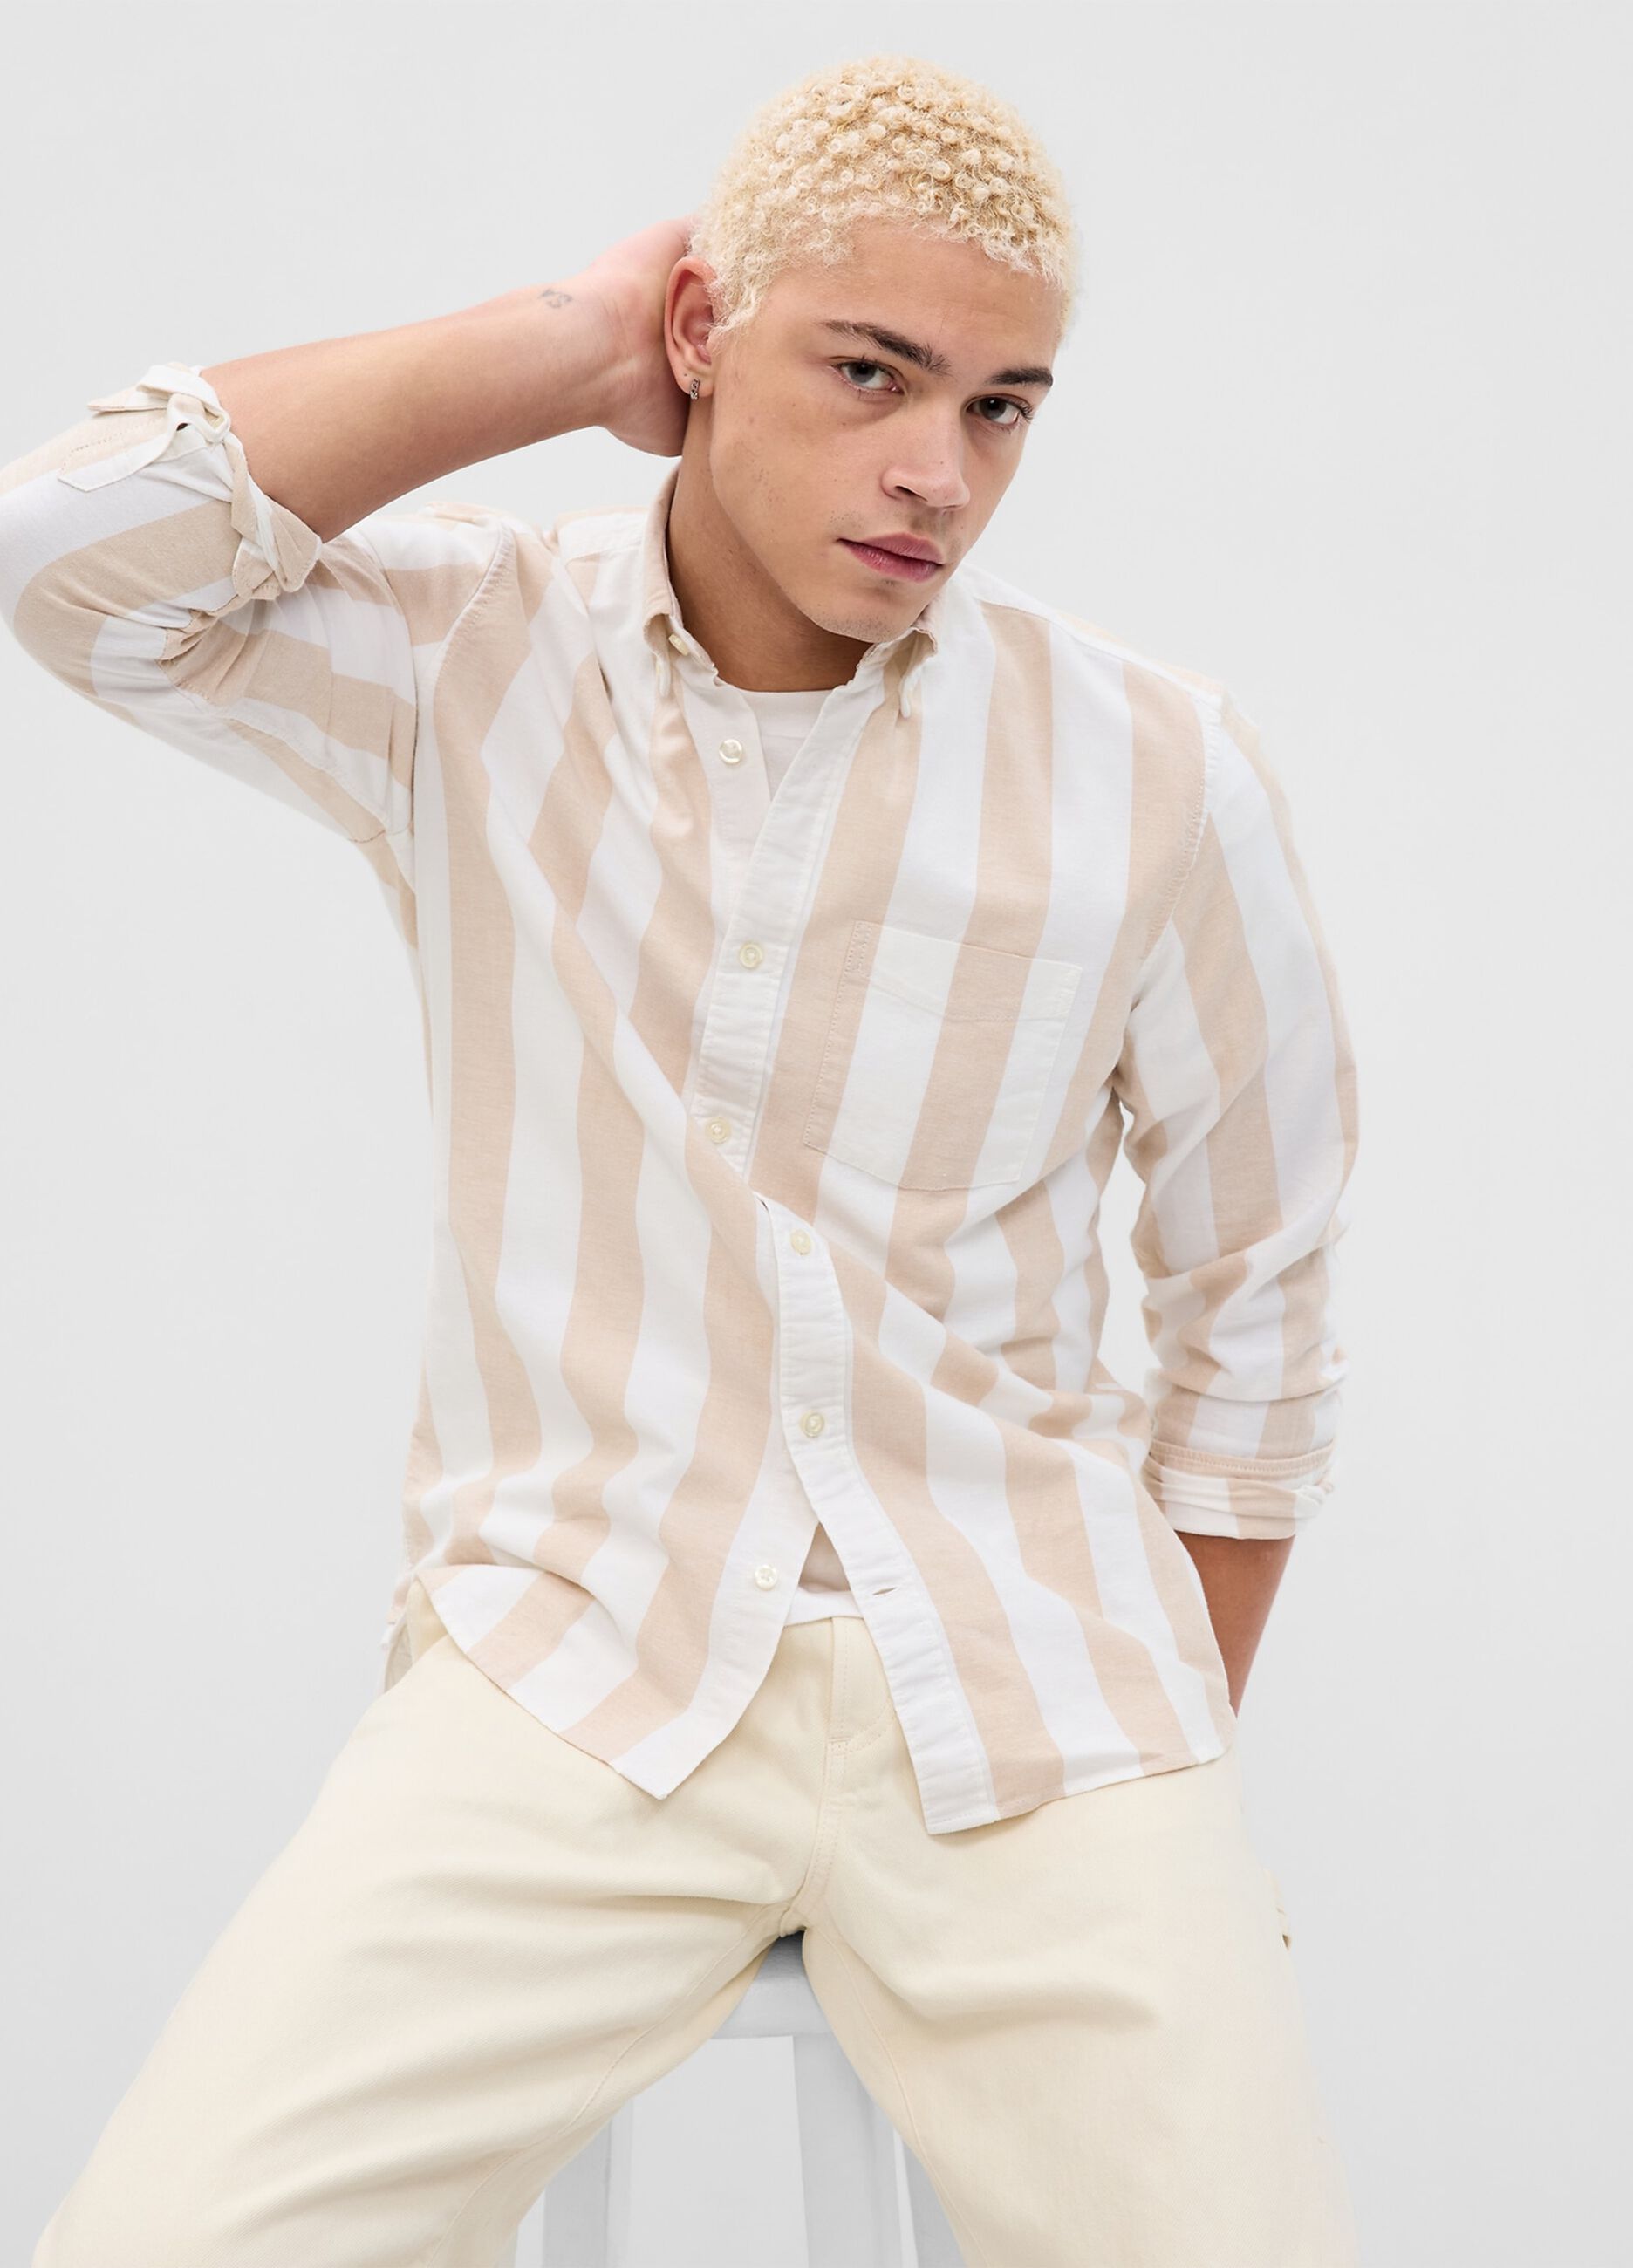 Regular-fit shirt in stretch oxford cotton